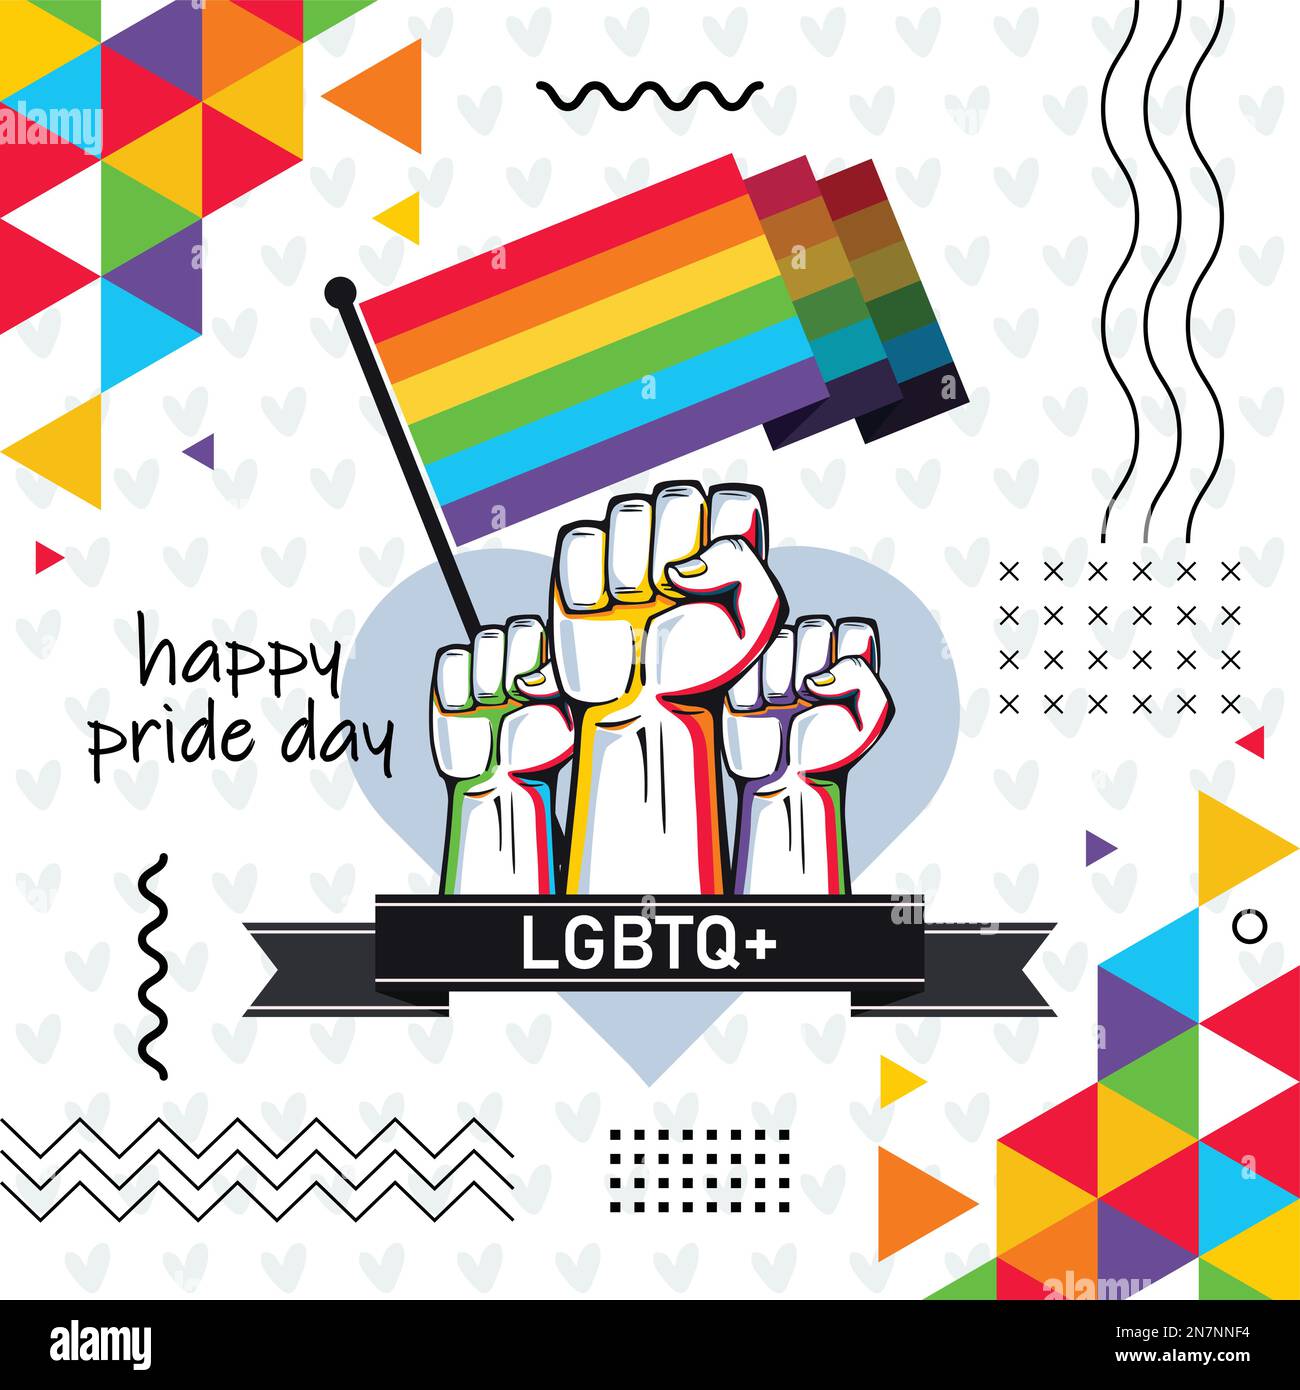 Pride day parade design with modern background. Colorful Rainbow LGBTQ rights. Lesbians, gays, bisexuals, transgenders, queer. LGBTQ+ community flag Stock Vector